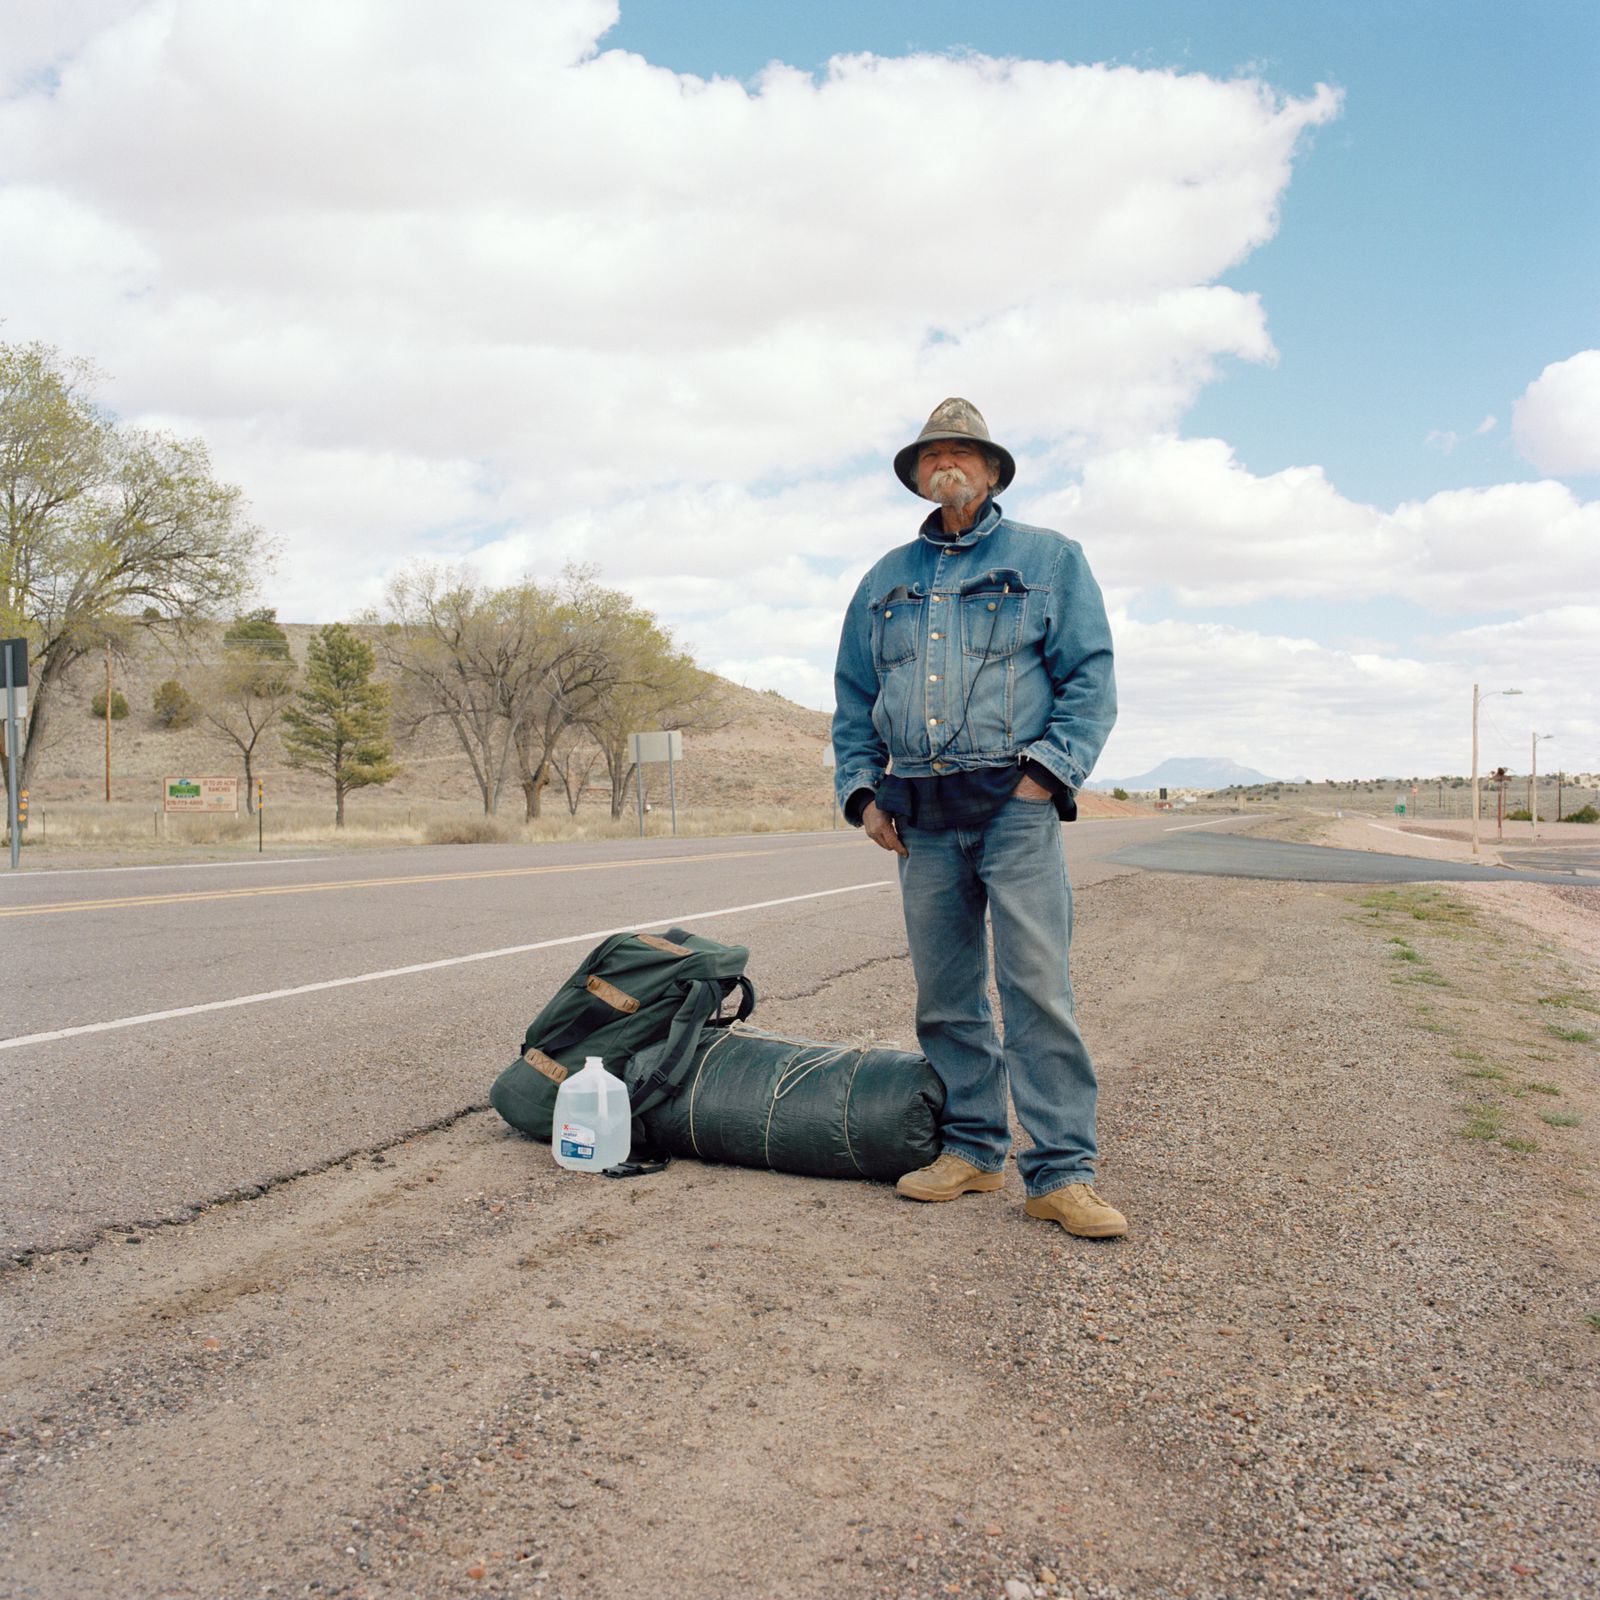 © Louise Amelie - "150 Miles To Springerville" Hitchhiker in Texas.